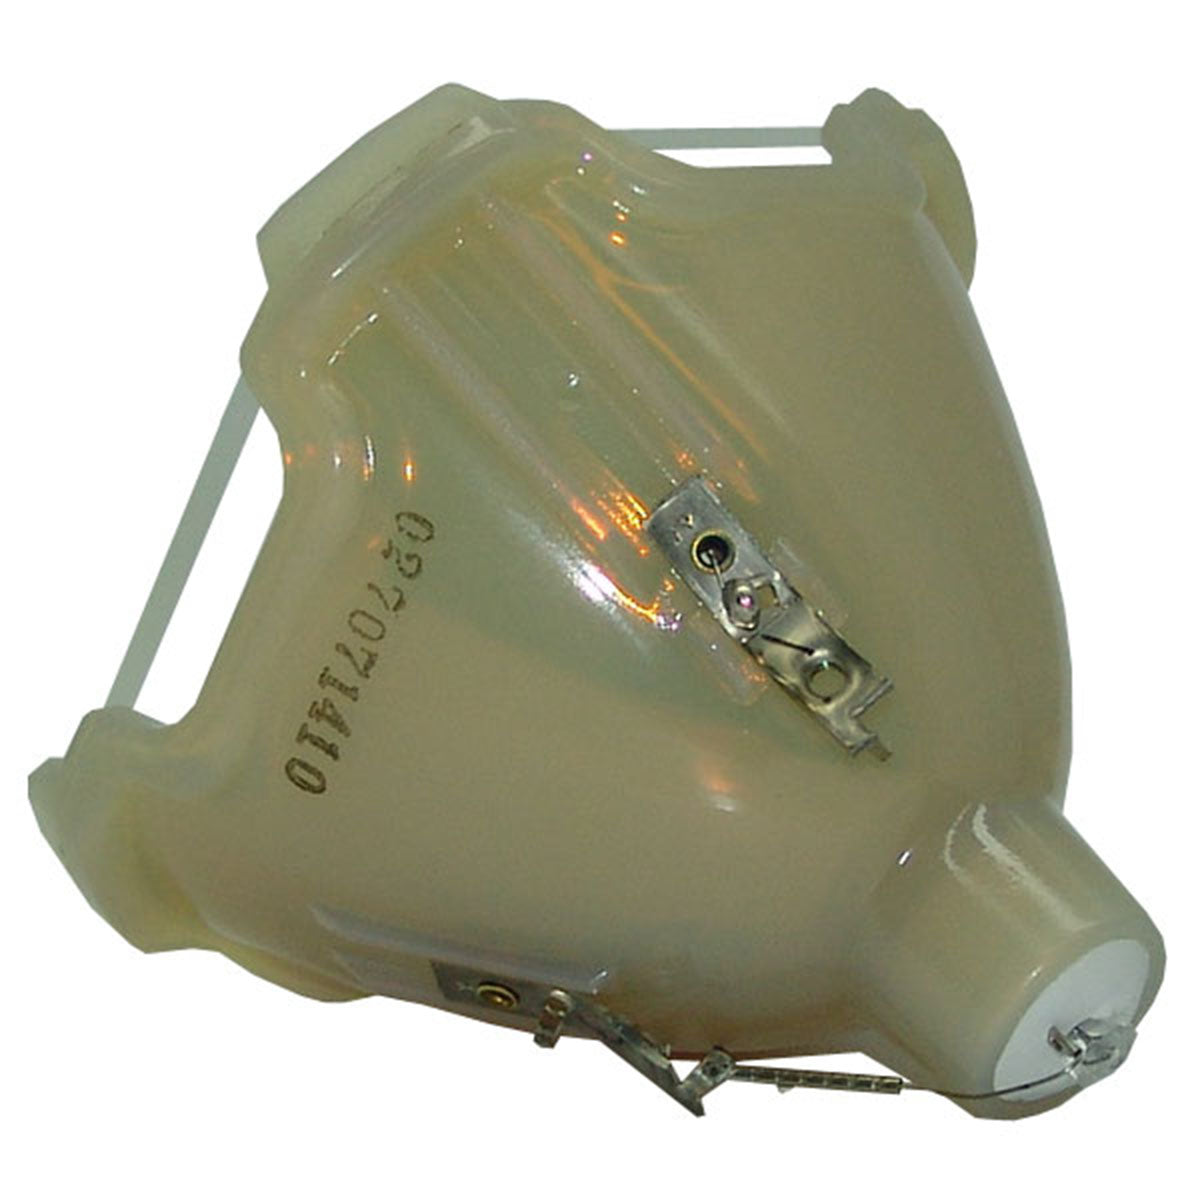 Christie 03-000709-01 Philips Projector Bare Lamp